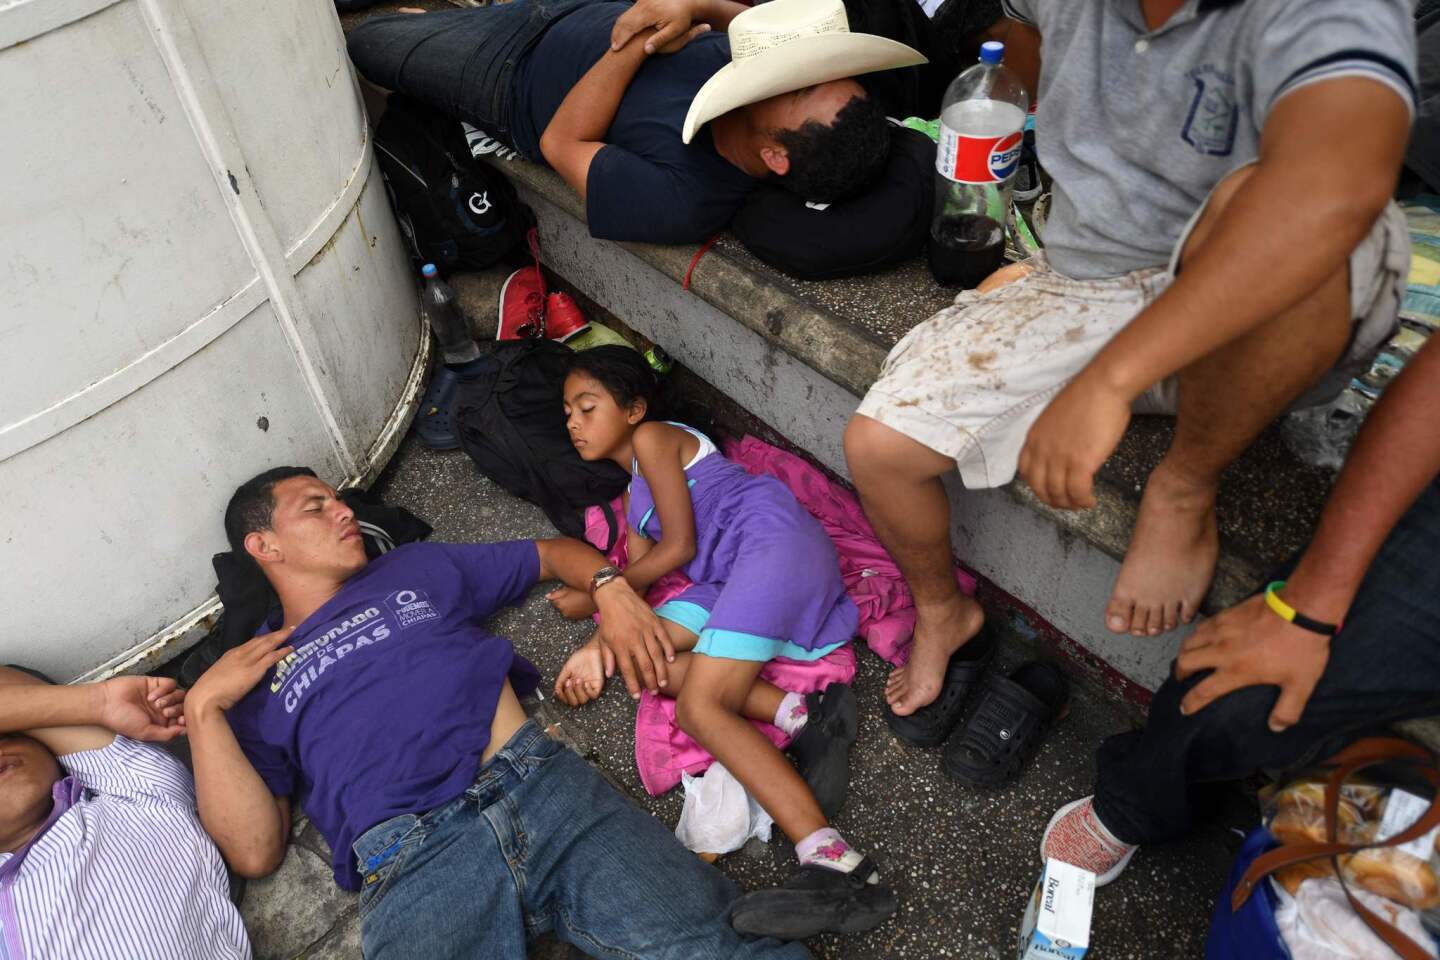 Honduran migrants taking part in a caravan heading to the U.S. rest at the main square in Tapachula, Chiapas state, Mexico.